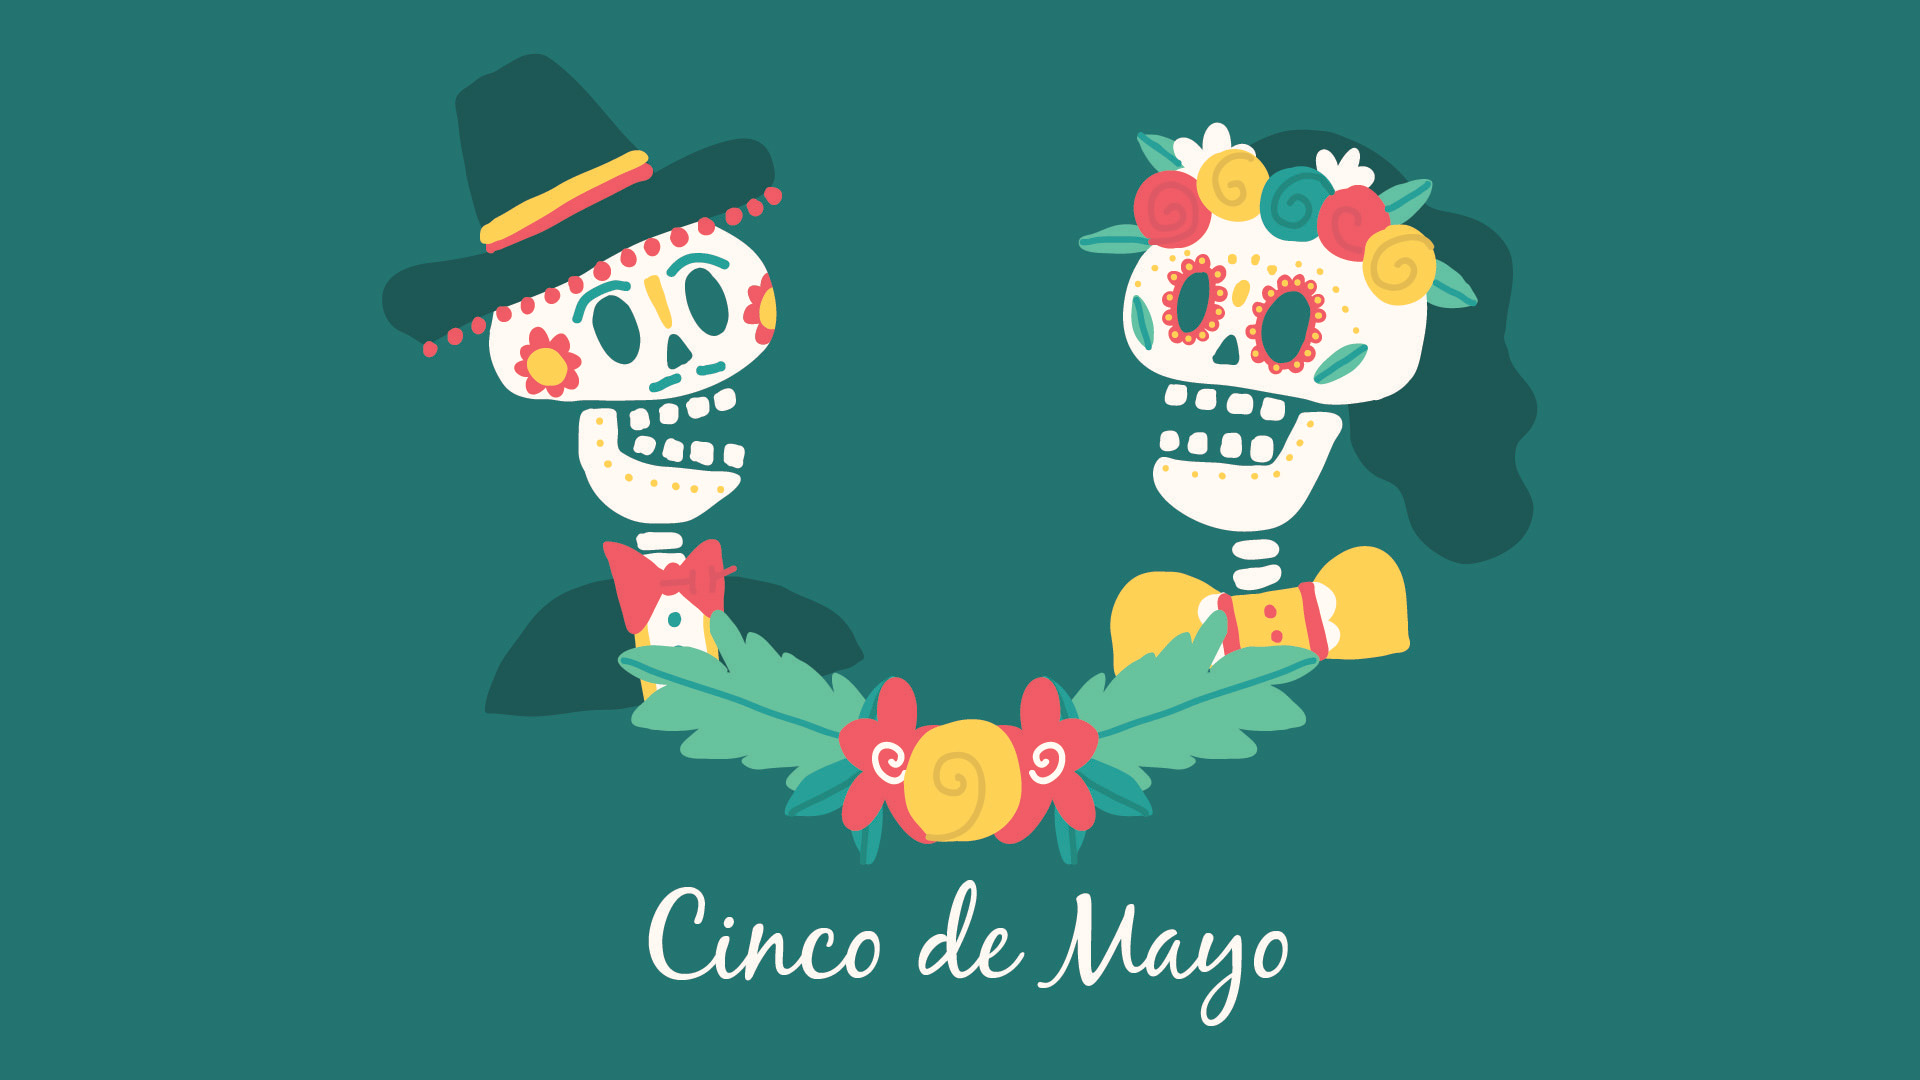 Teal background with two skeletons, one wearing a sombrero and the other wearing flowers on their head. their skeleton faces are painted in red yellow and green paint. Cinco de Mayo is written across the bottom in white cursive text.